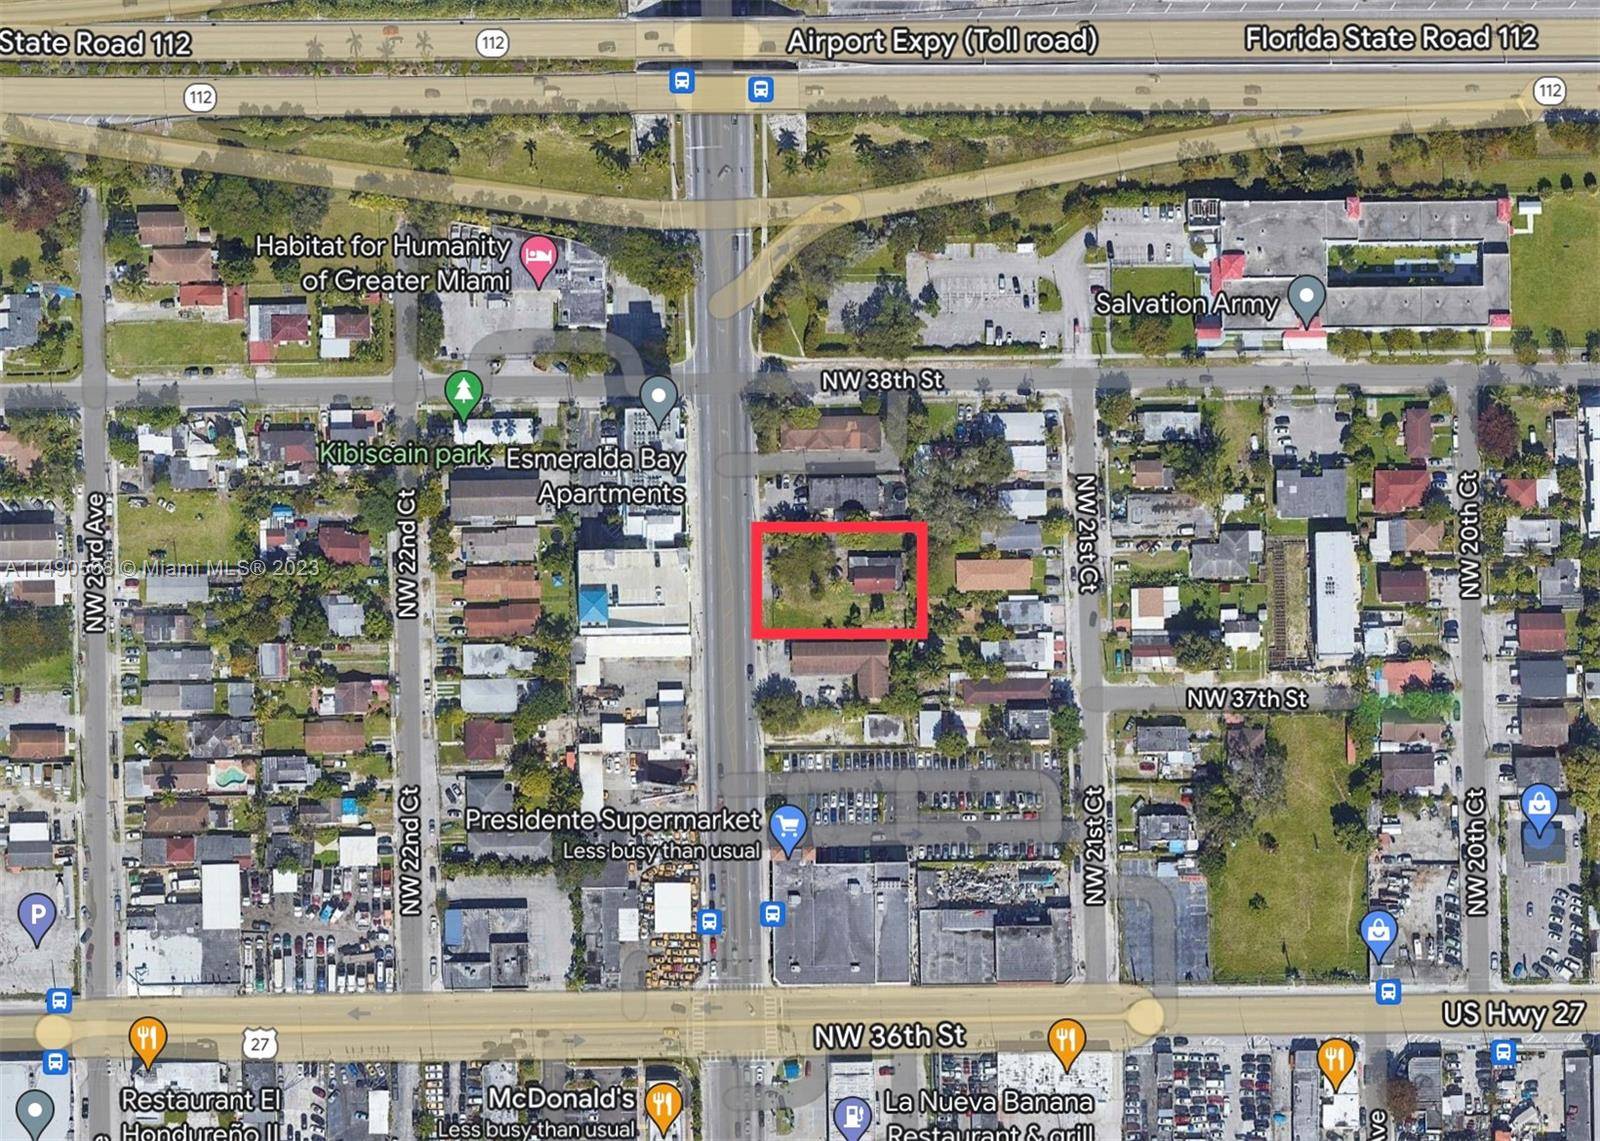 COMMERCIAL LOT FENCED ON NW 22 AVENUE JUST SOUTH OF AIRPORT EXPRESSWAY BY ONE BLOCK.